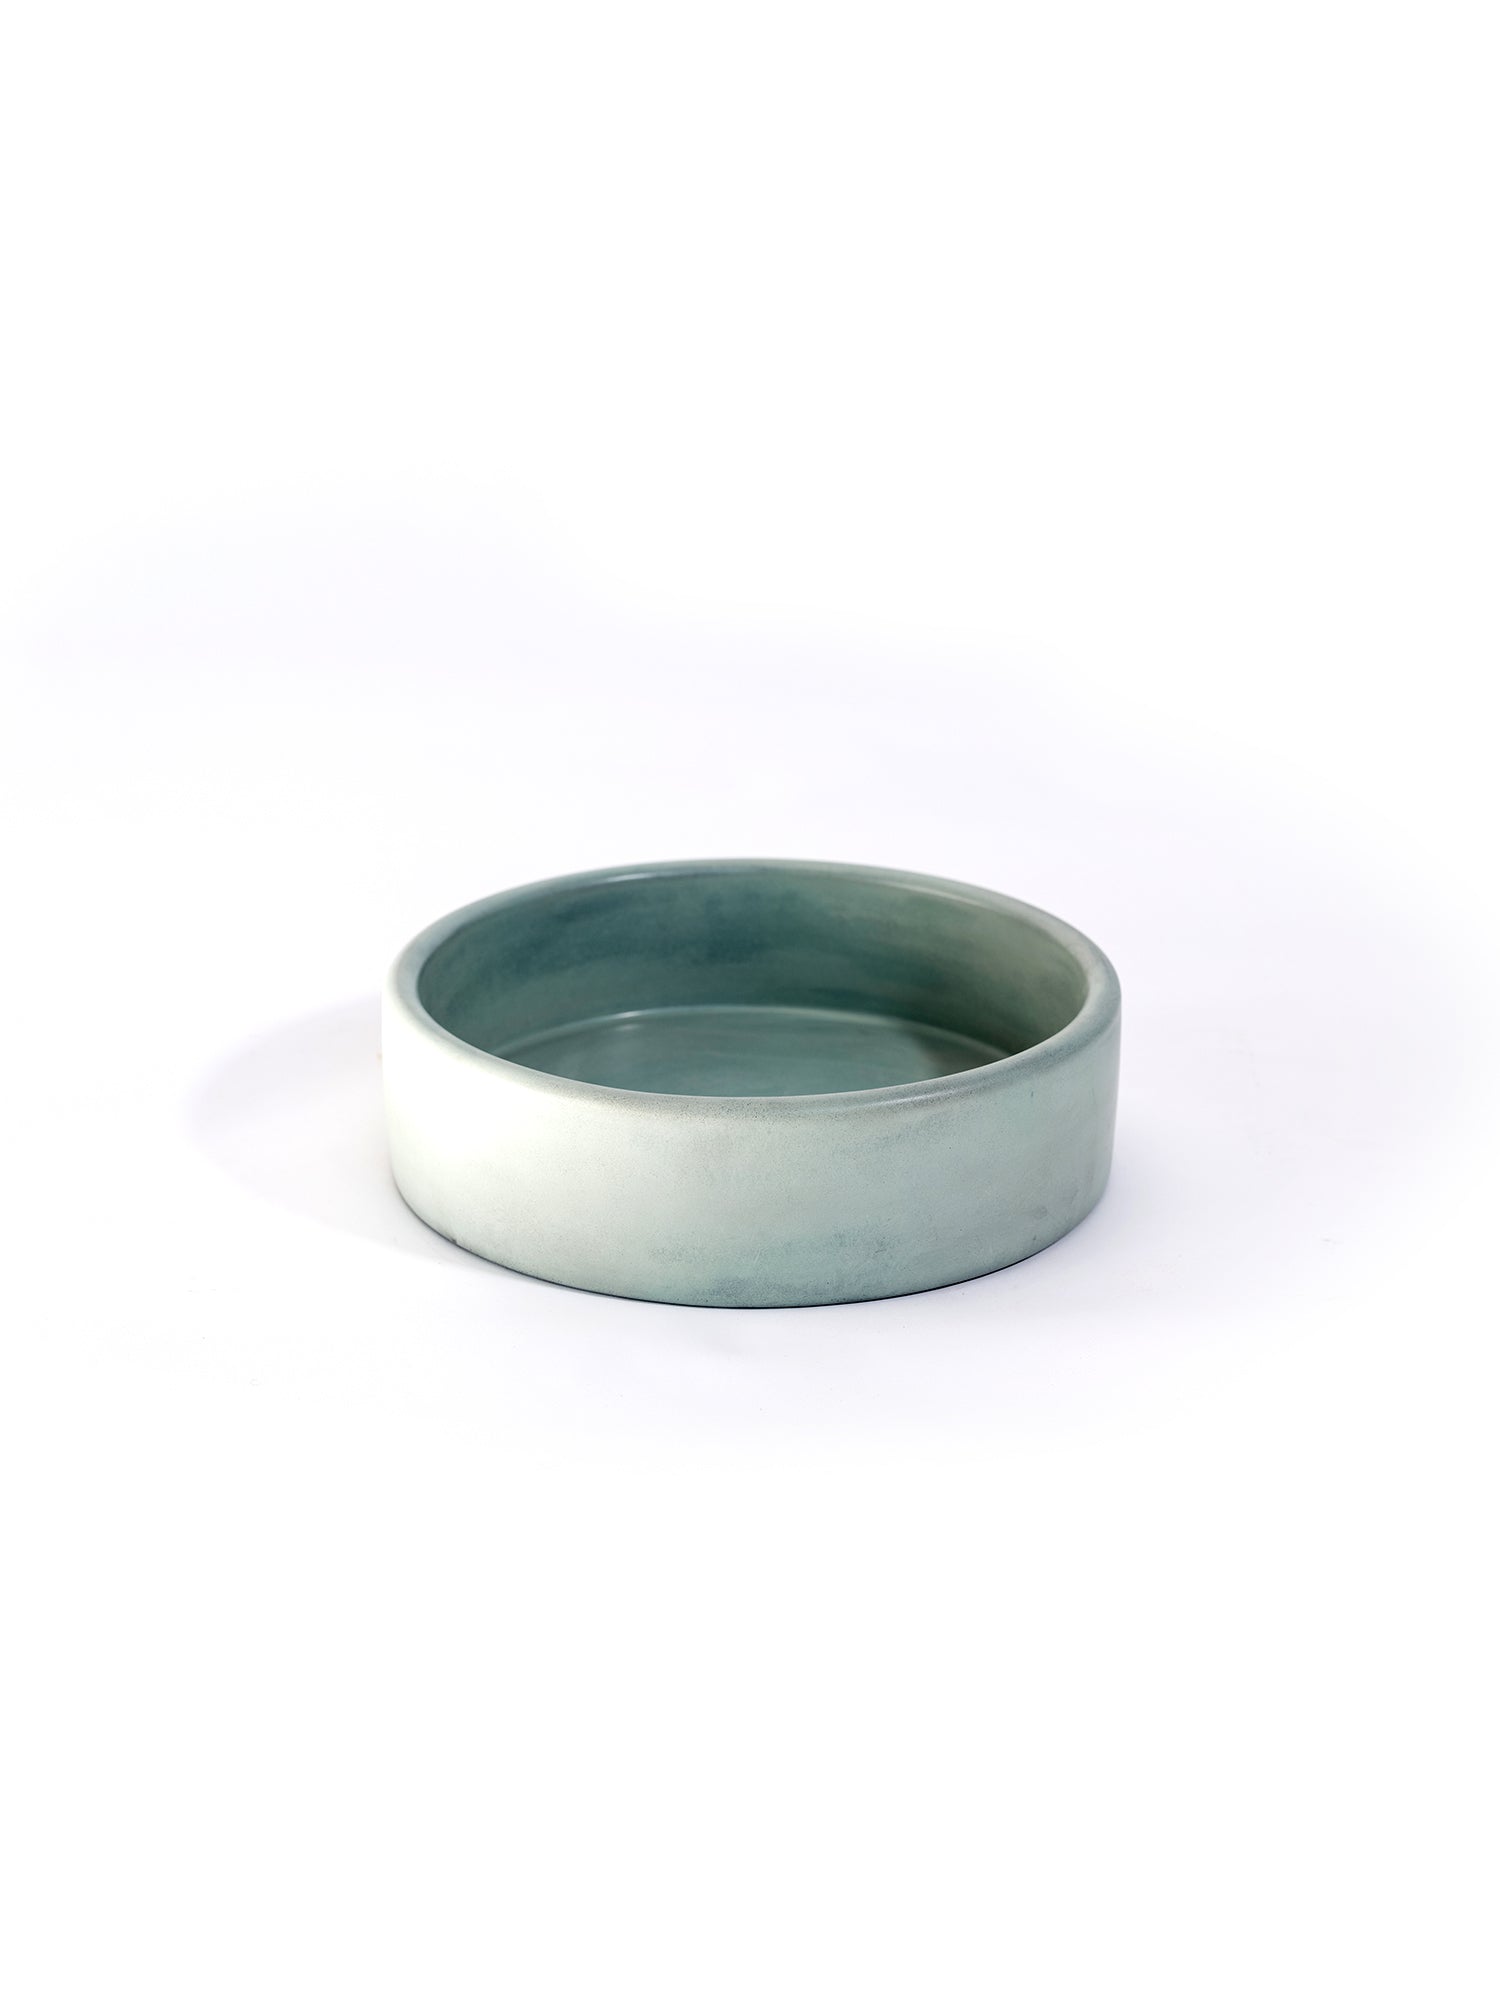 The Bowl Concrete Countertop Basin (Avail. in 14 Colours)